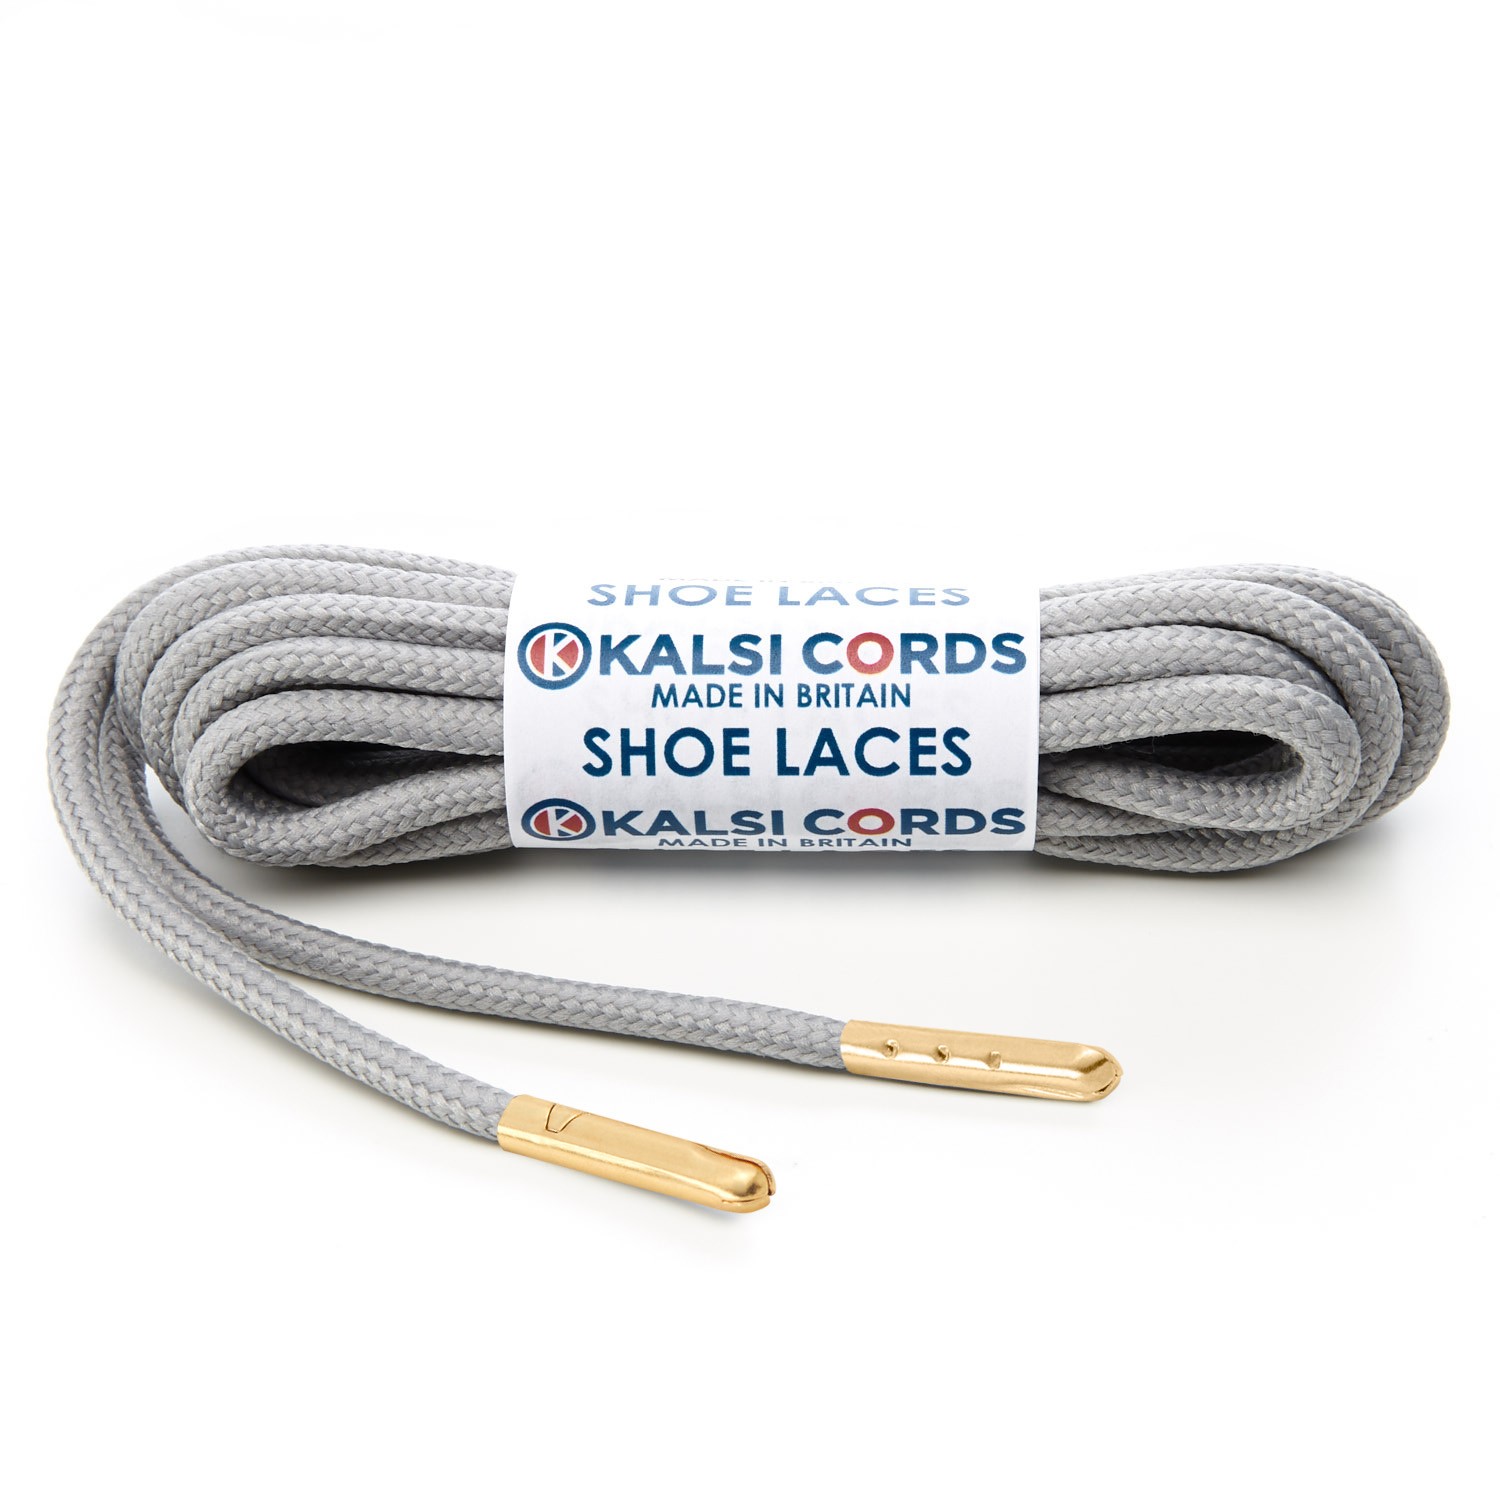 T621 5mm Round Polyester Shoe Laces Light Grey 1 Gold Metal Tip Kalsi Cords